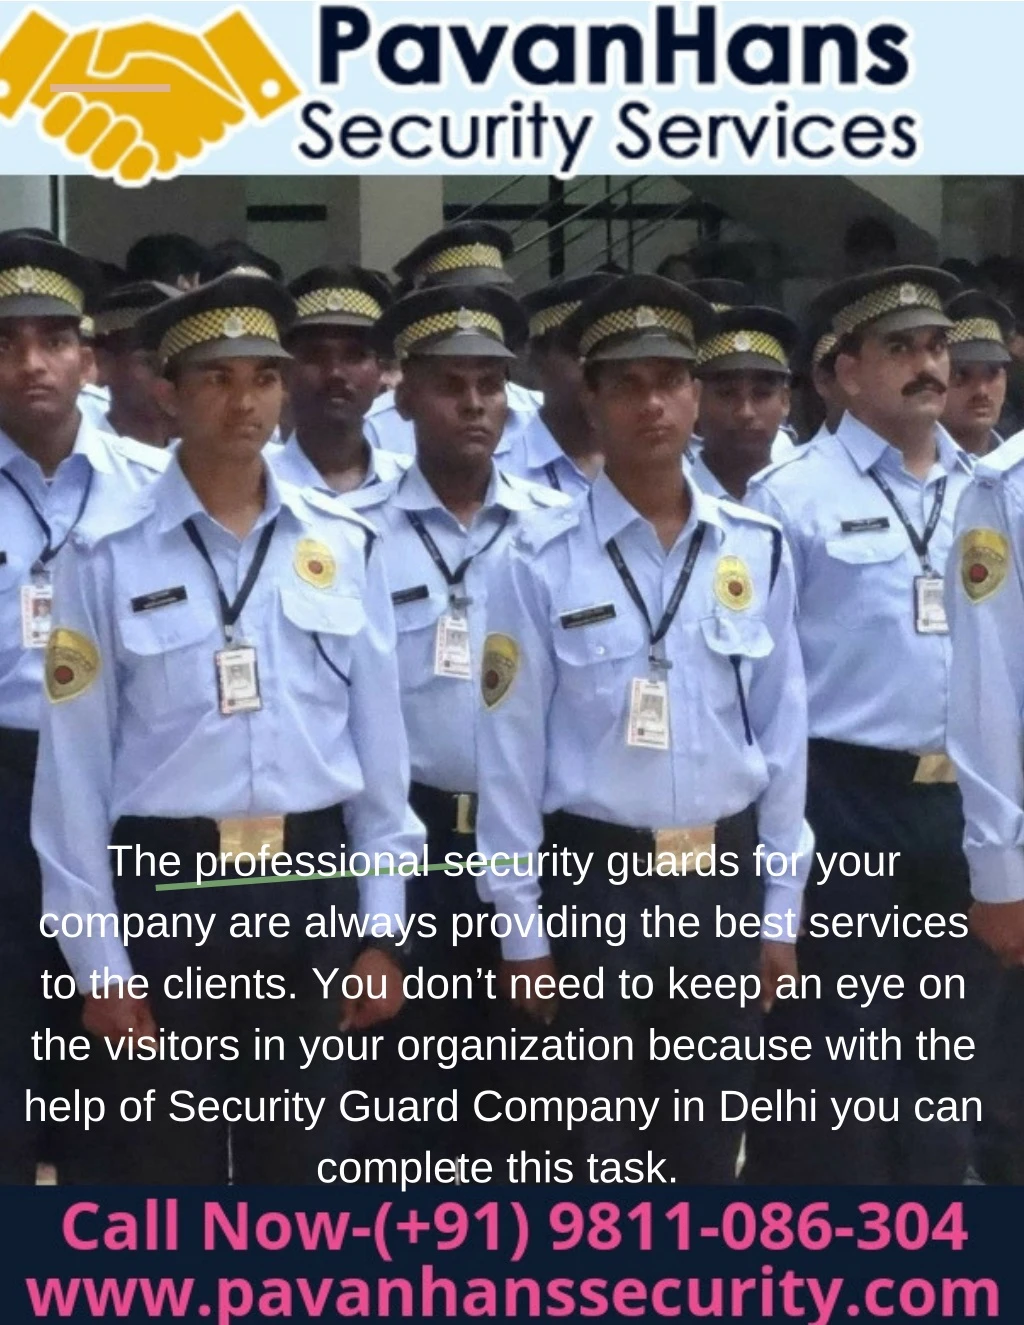 the professional security guards for your company